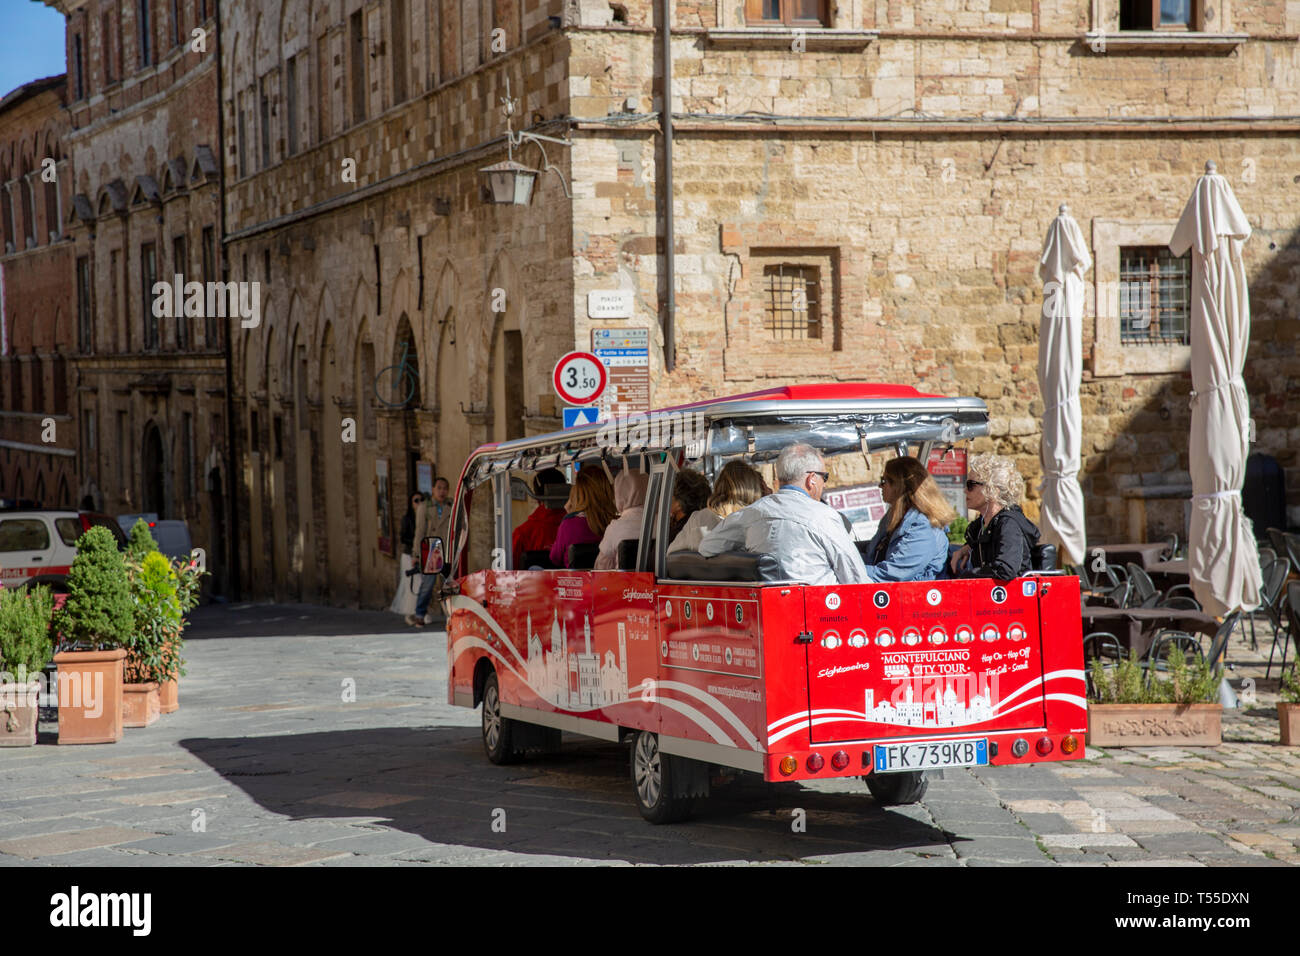 Montepulciano tour sightseeing small bus departs the town square piazza for a tour of this medieval hilltop town in Tuscany,Italy,Europe Stock Photo